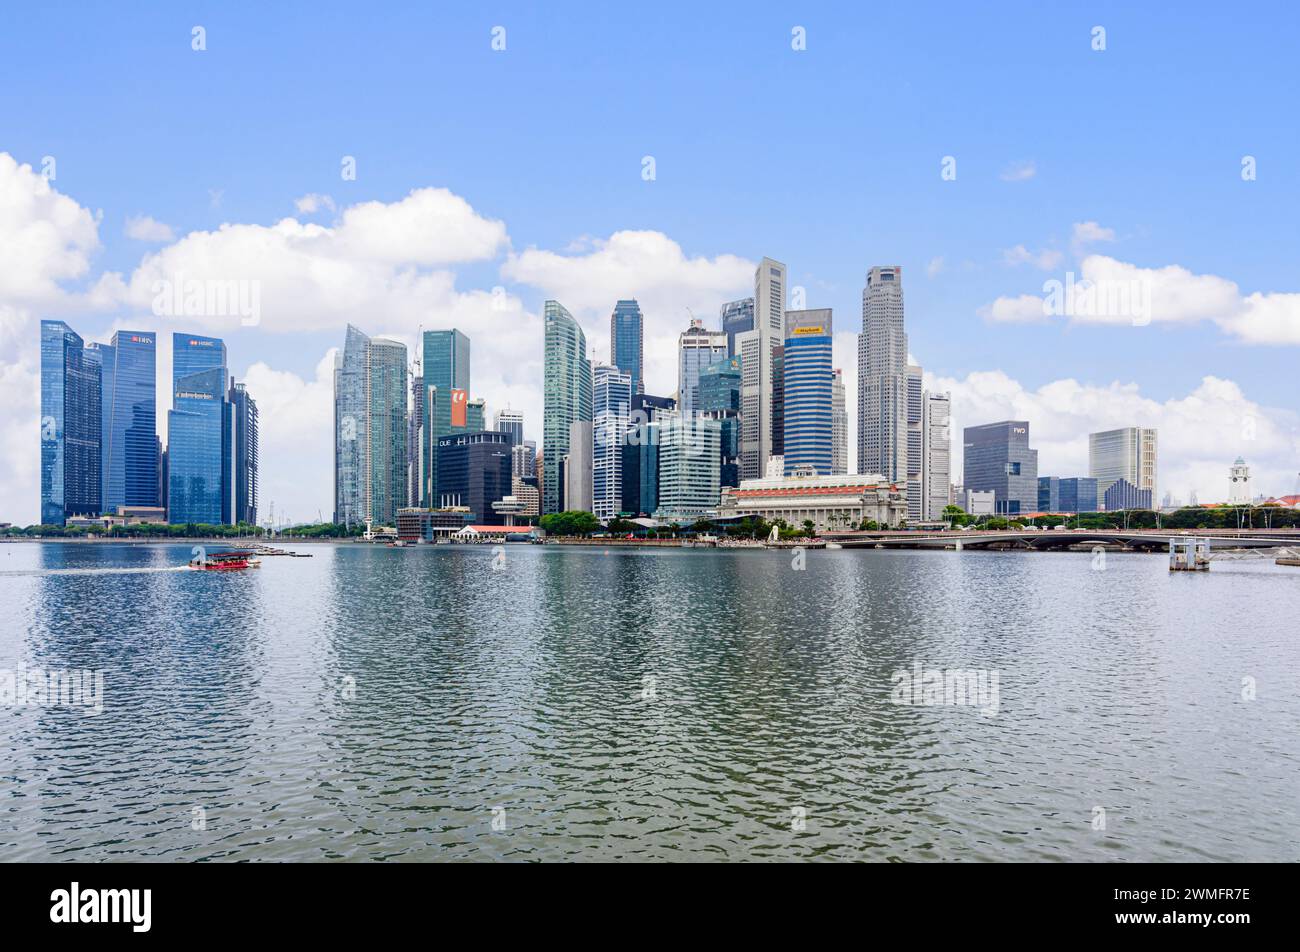 Cityscape of Singapore's Central Business District, Downtown Core, Singapore Stock Photo